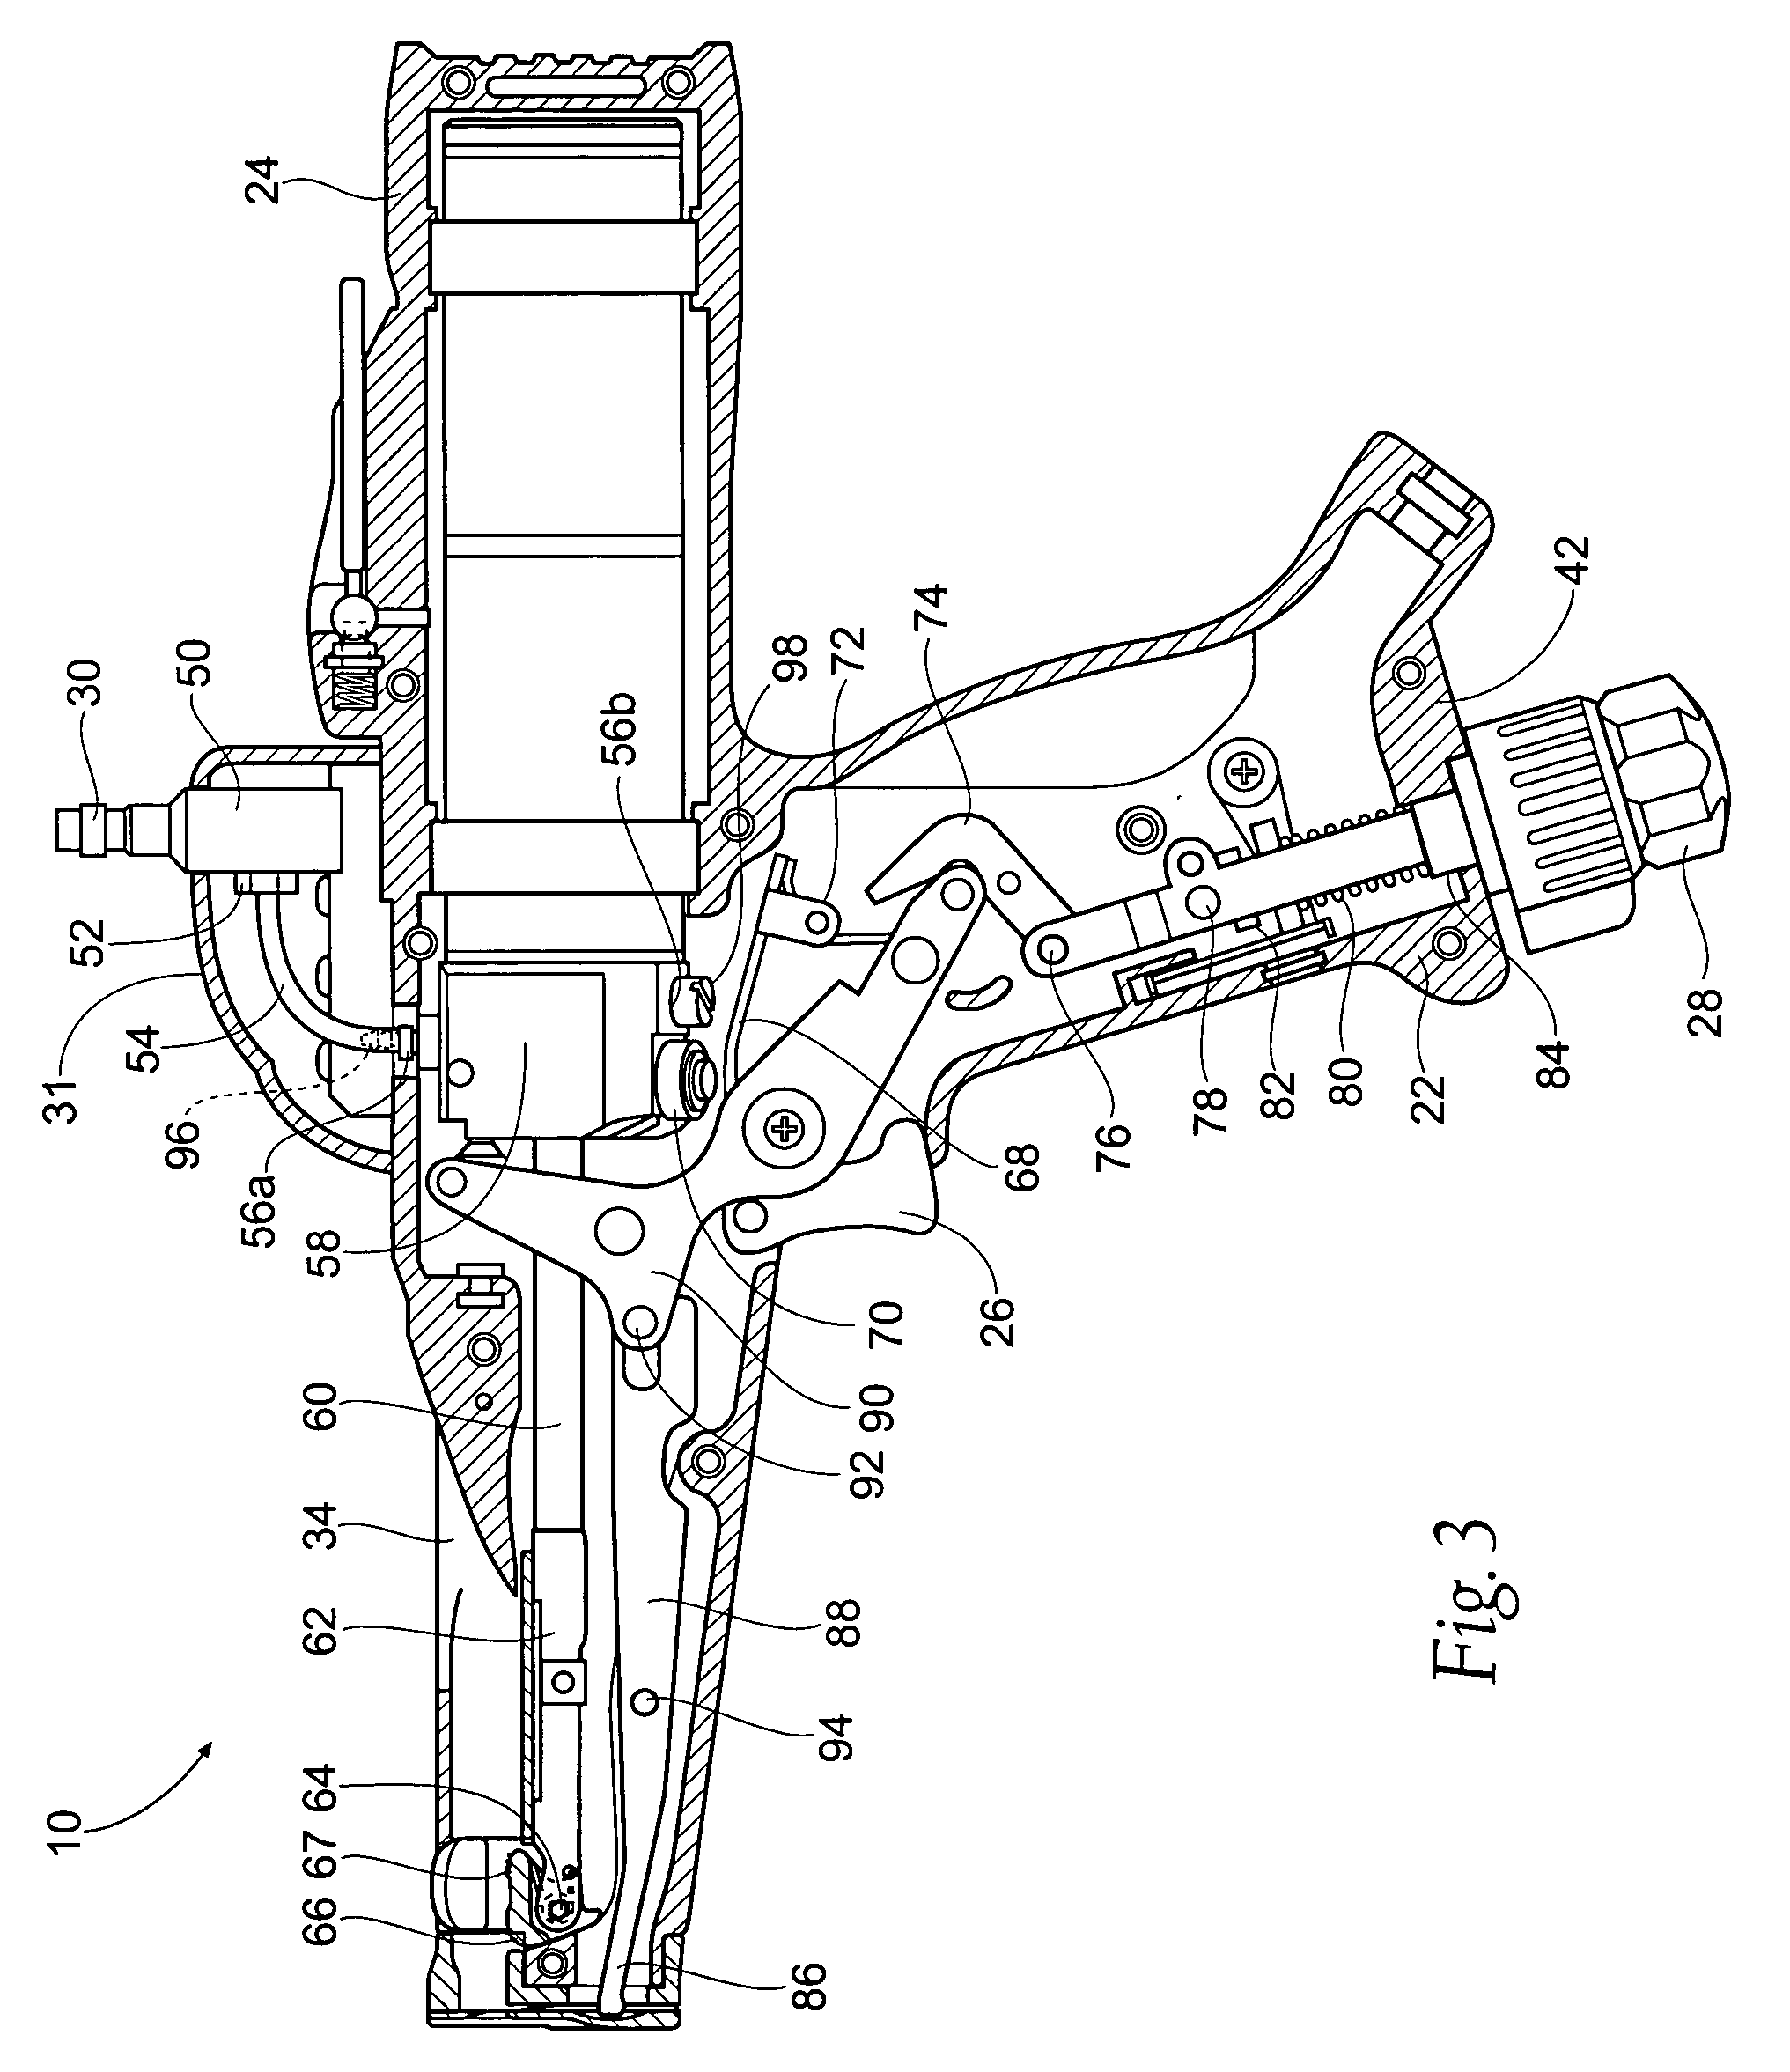 Pneumatic cable tie installation tool